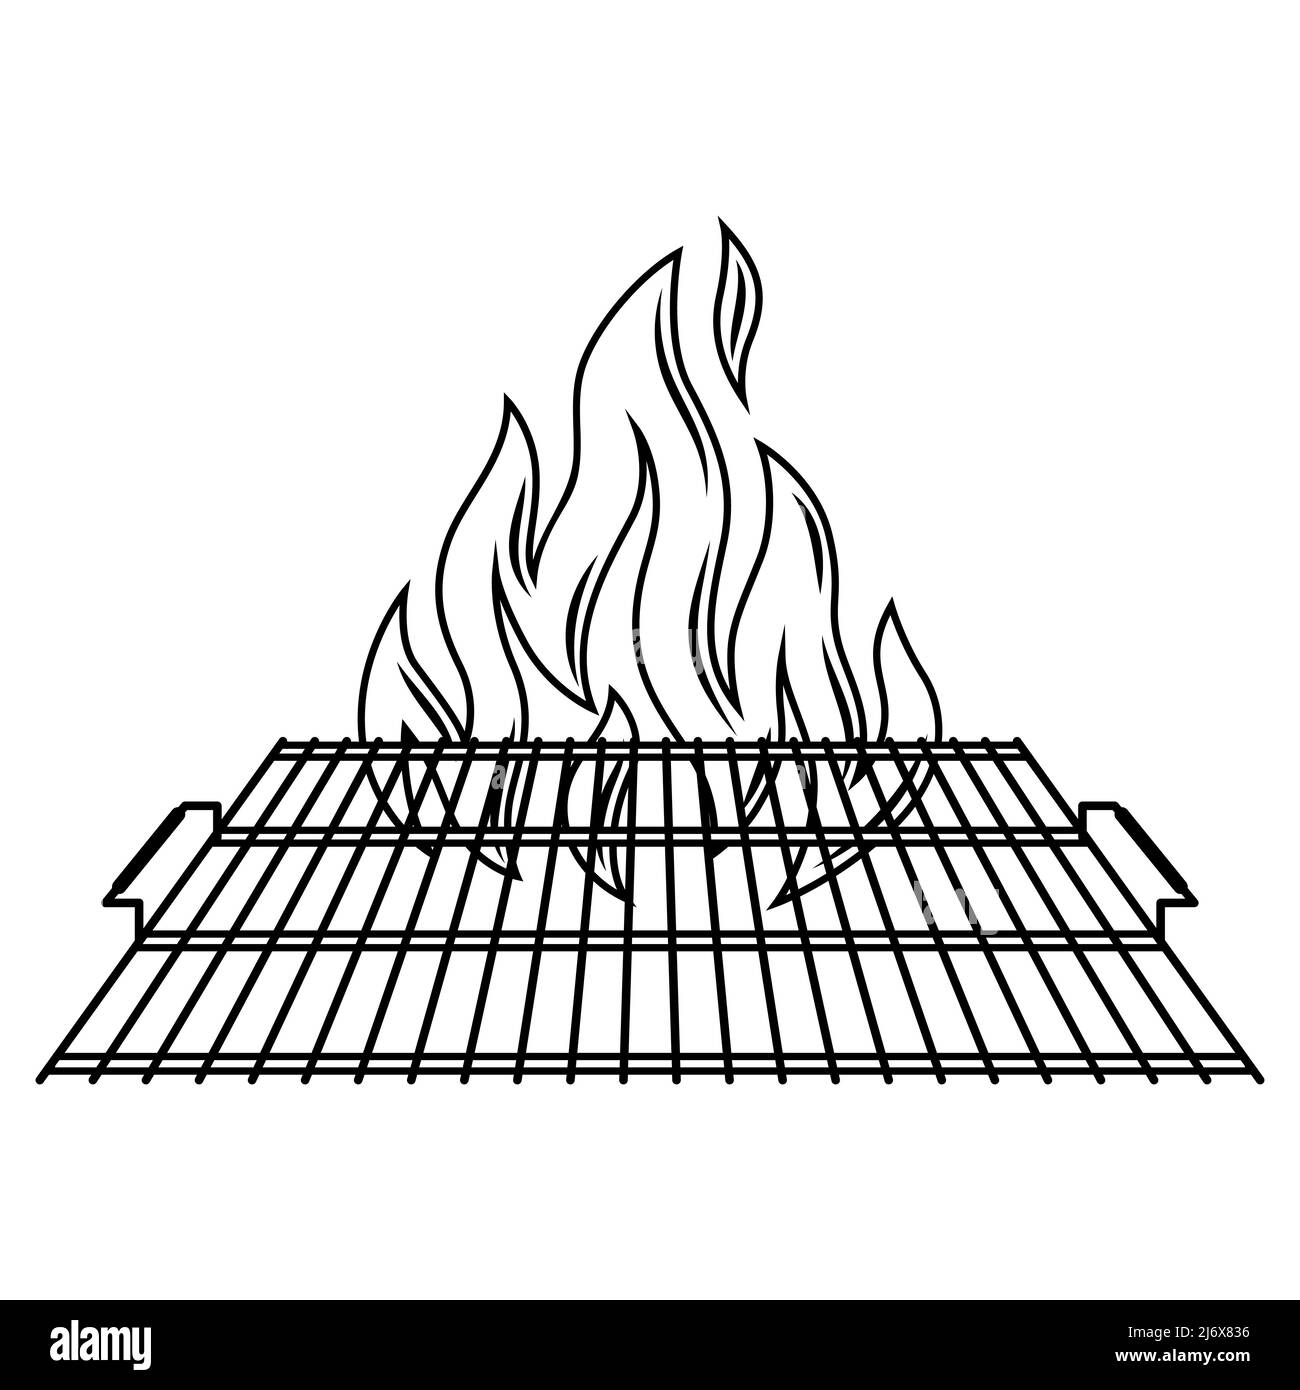 Illustration of steel grill grate with fire. Stylized bbq kitchen and restaurant utensil. Stock Vector